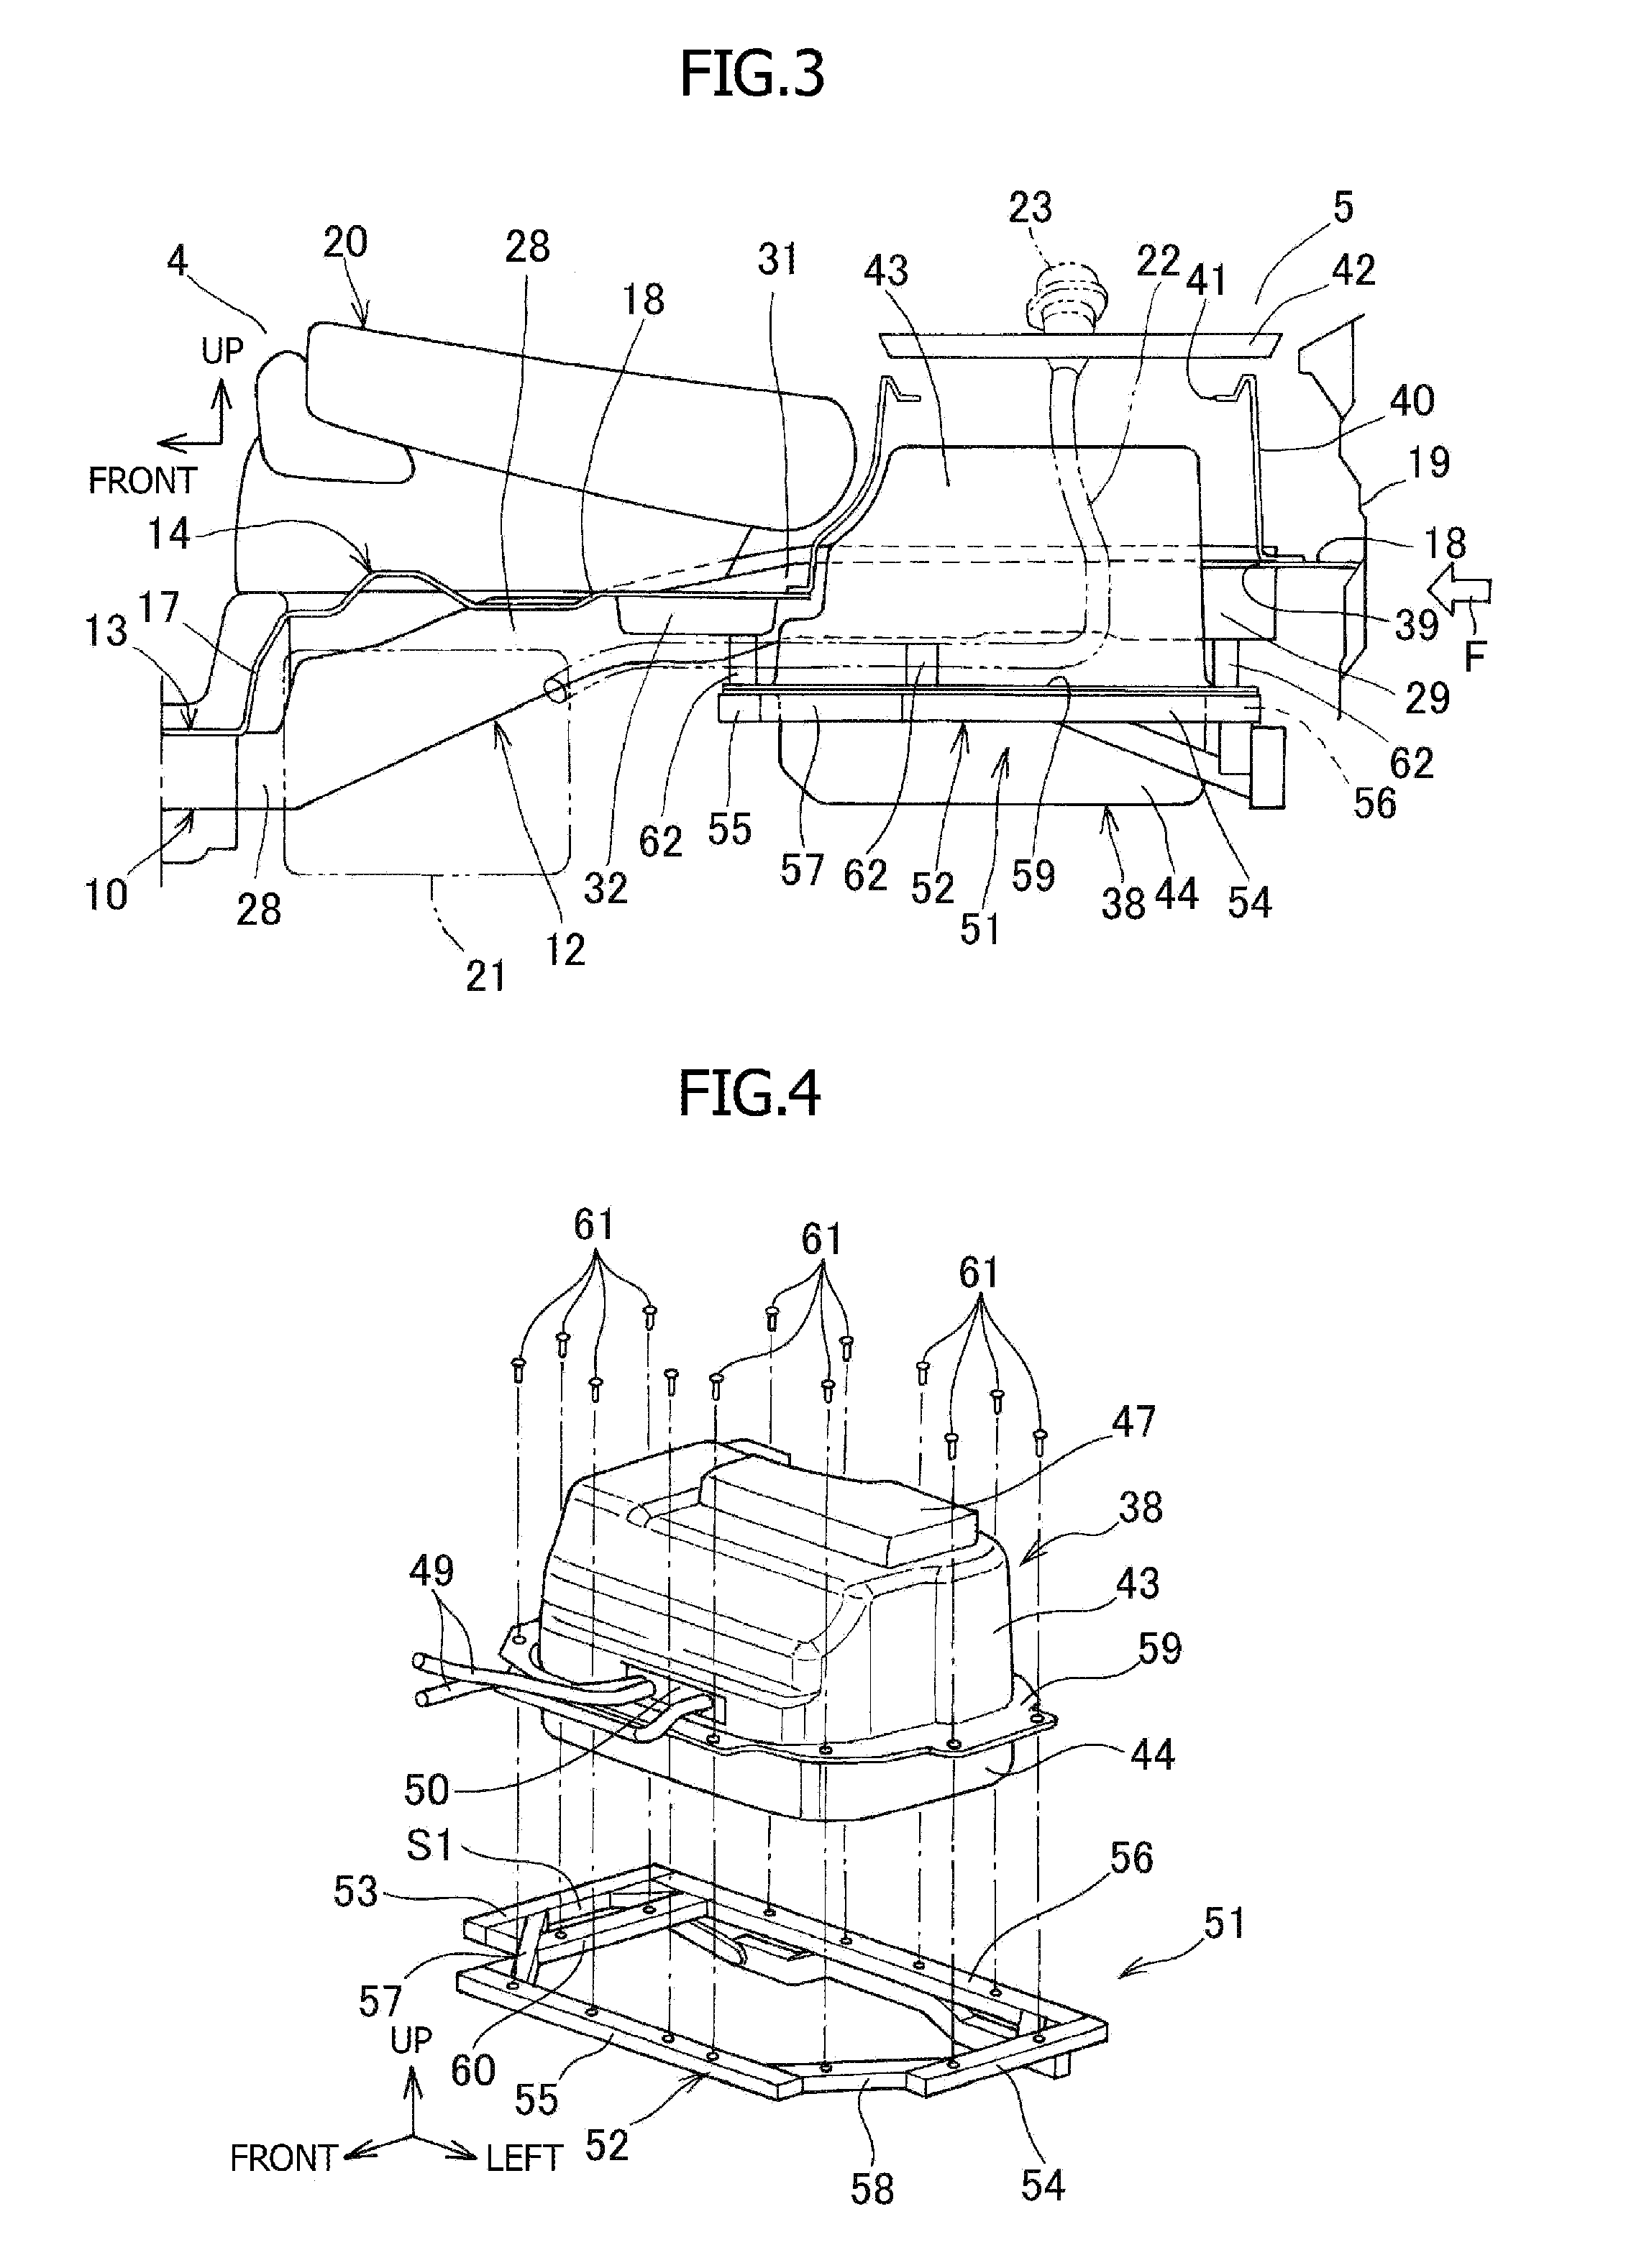 Battery pack mounting structure for electric car